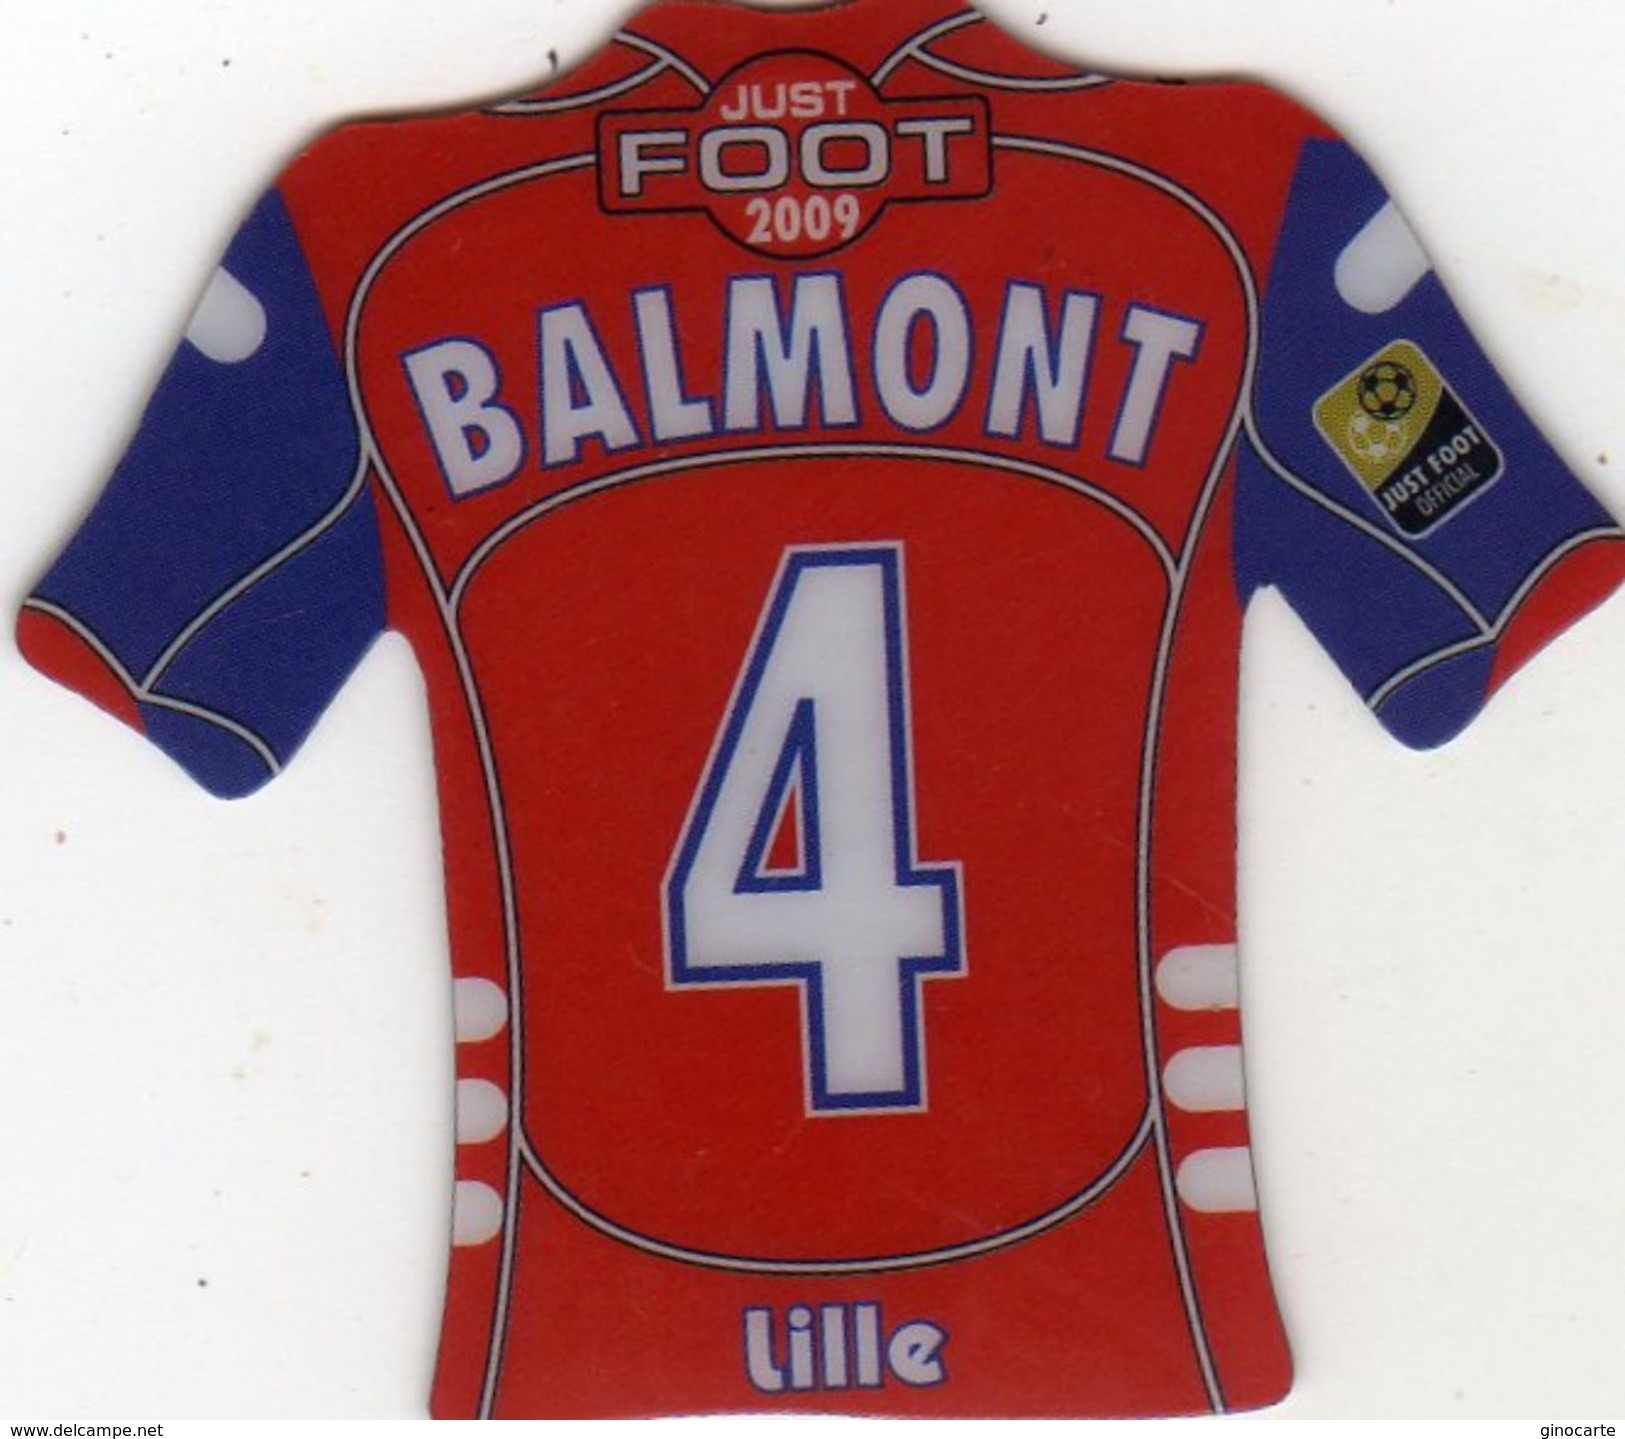 Magnet Magnets Maillot De Football Pitch Auxerre Lille Balmont 2009 - Deportes